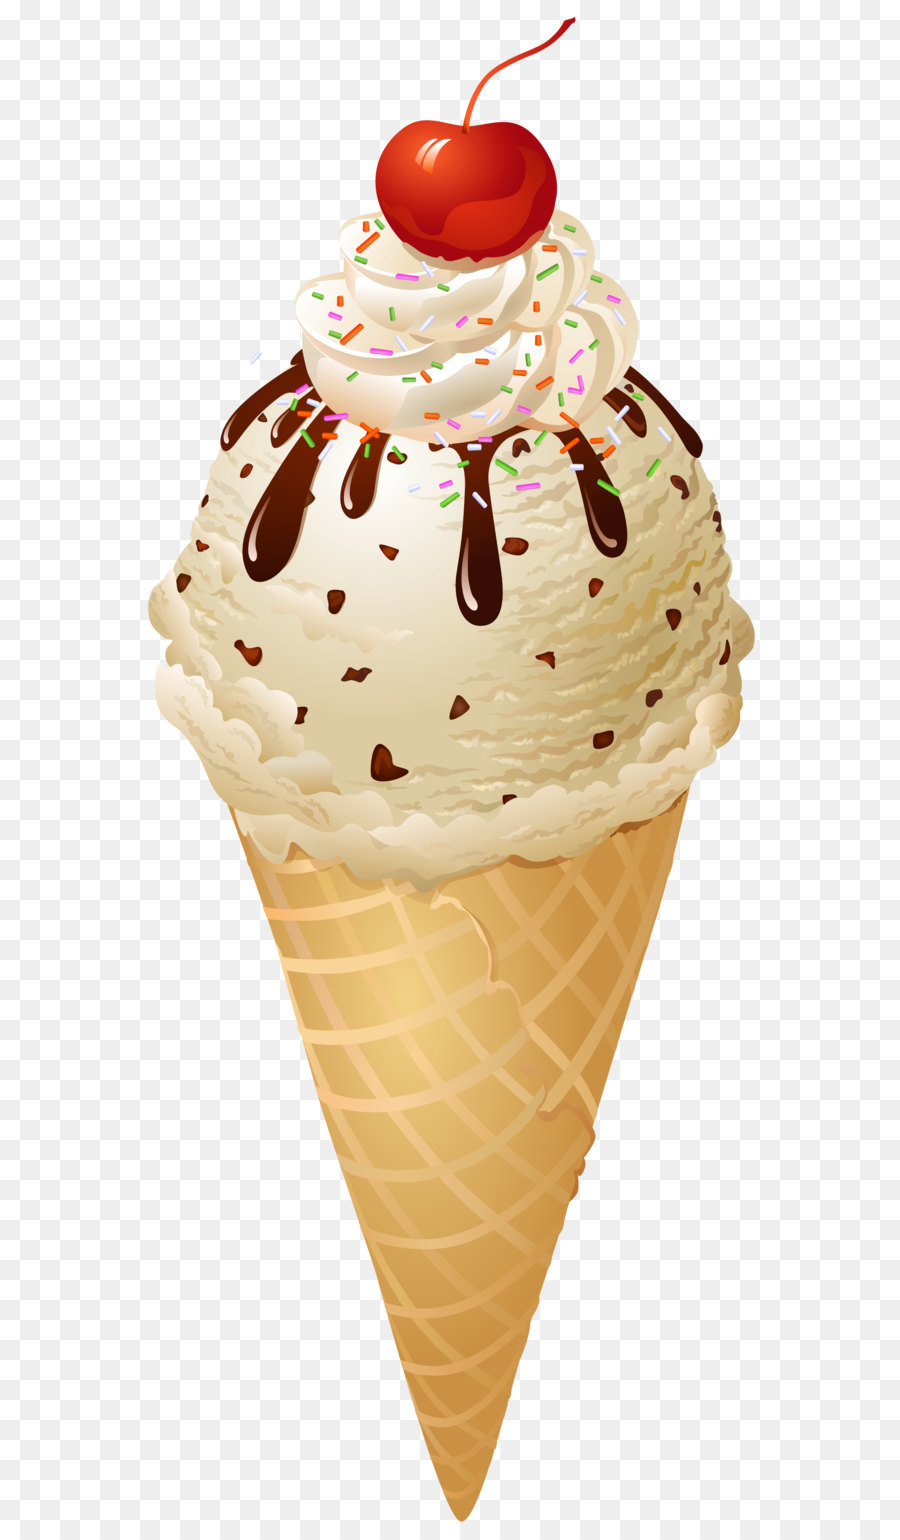 Ice cream cone Chocolate ice cream - Ice cream PNG image png download - 1683*3977 - Free Transparent Ice Cream png Download.